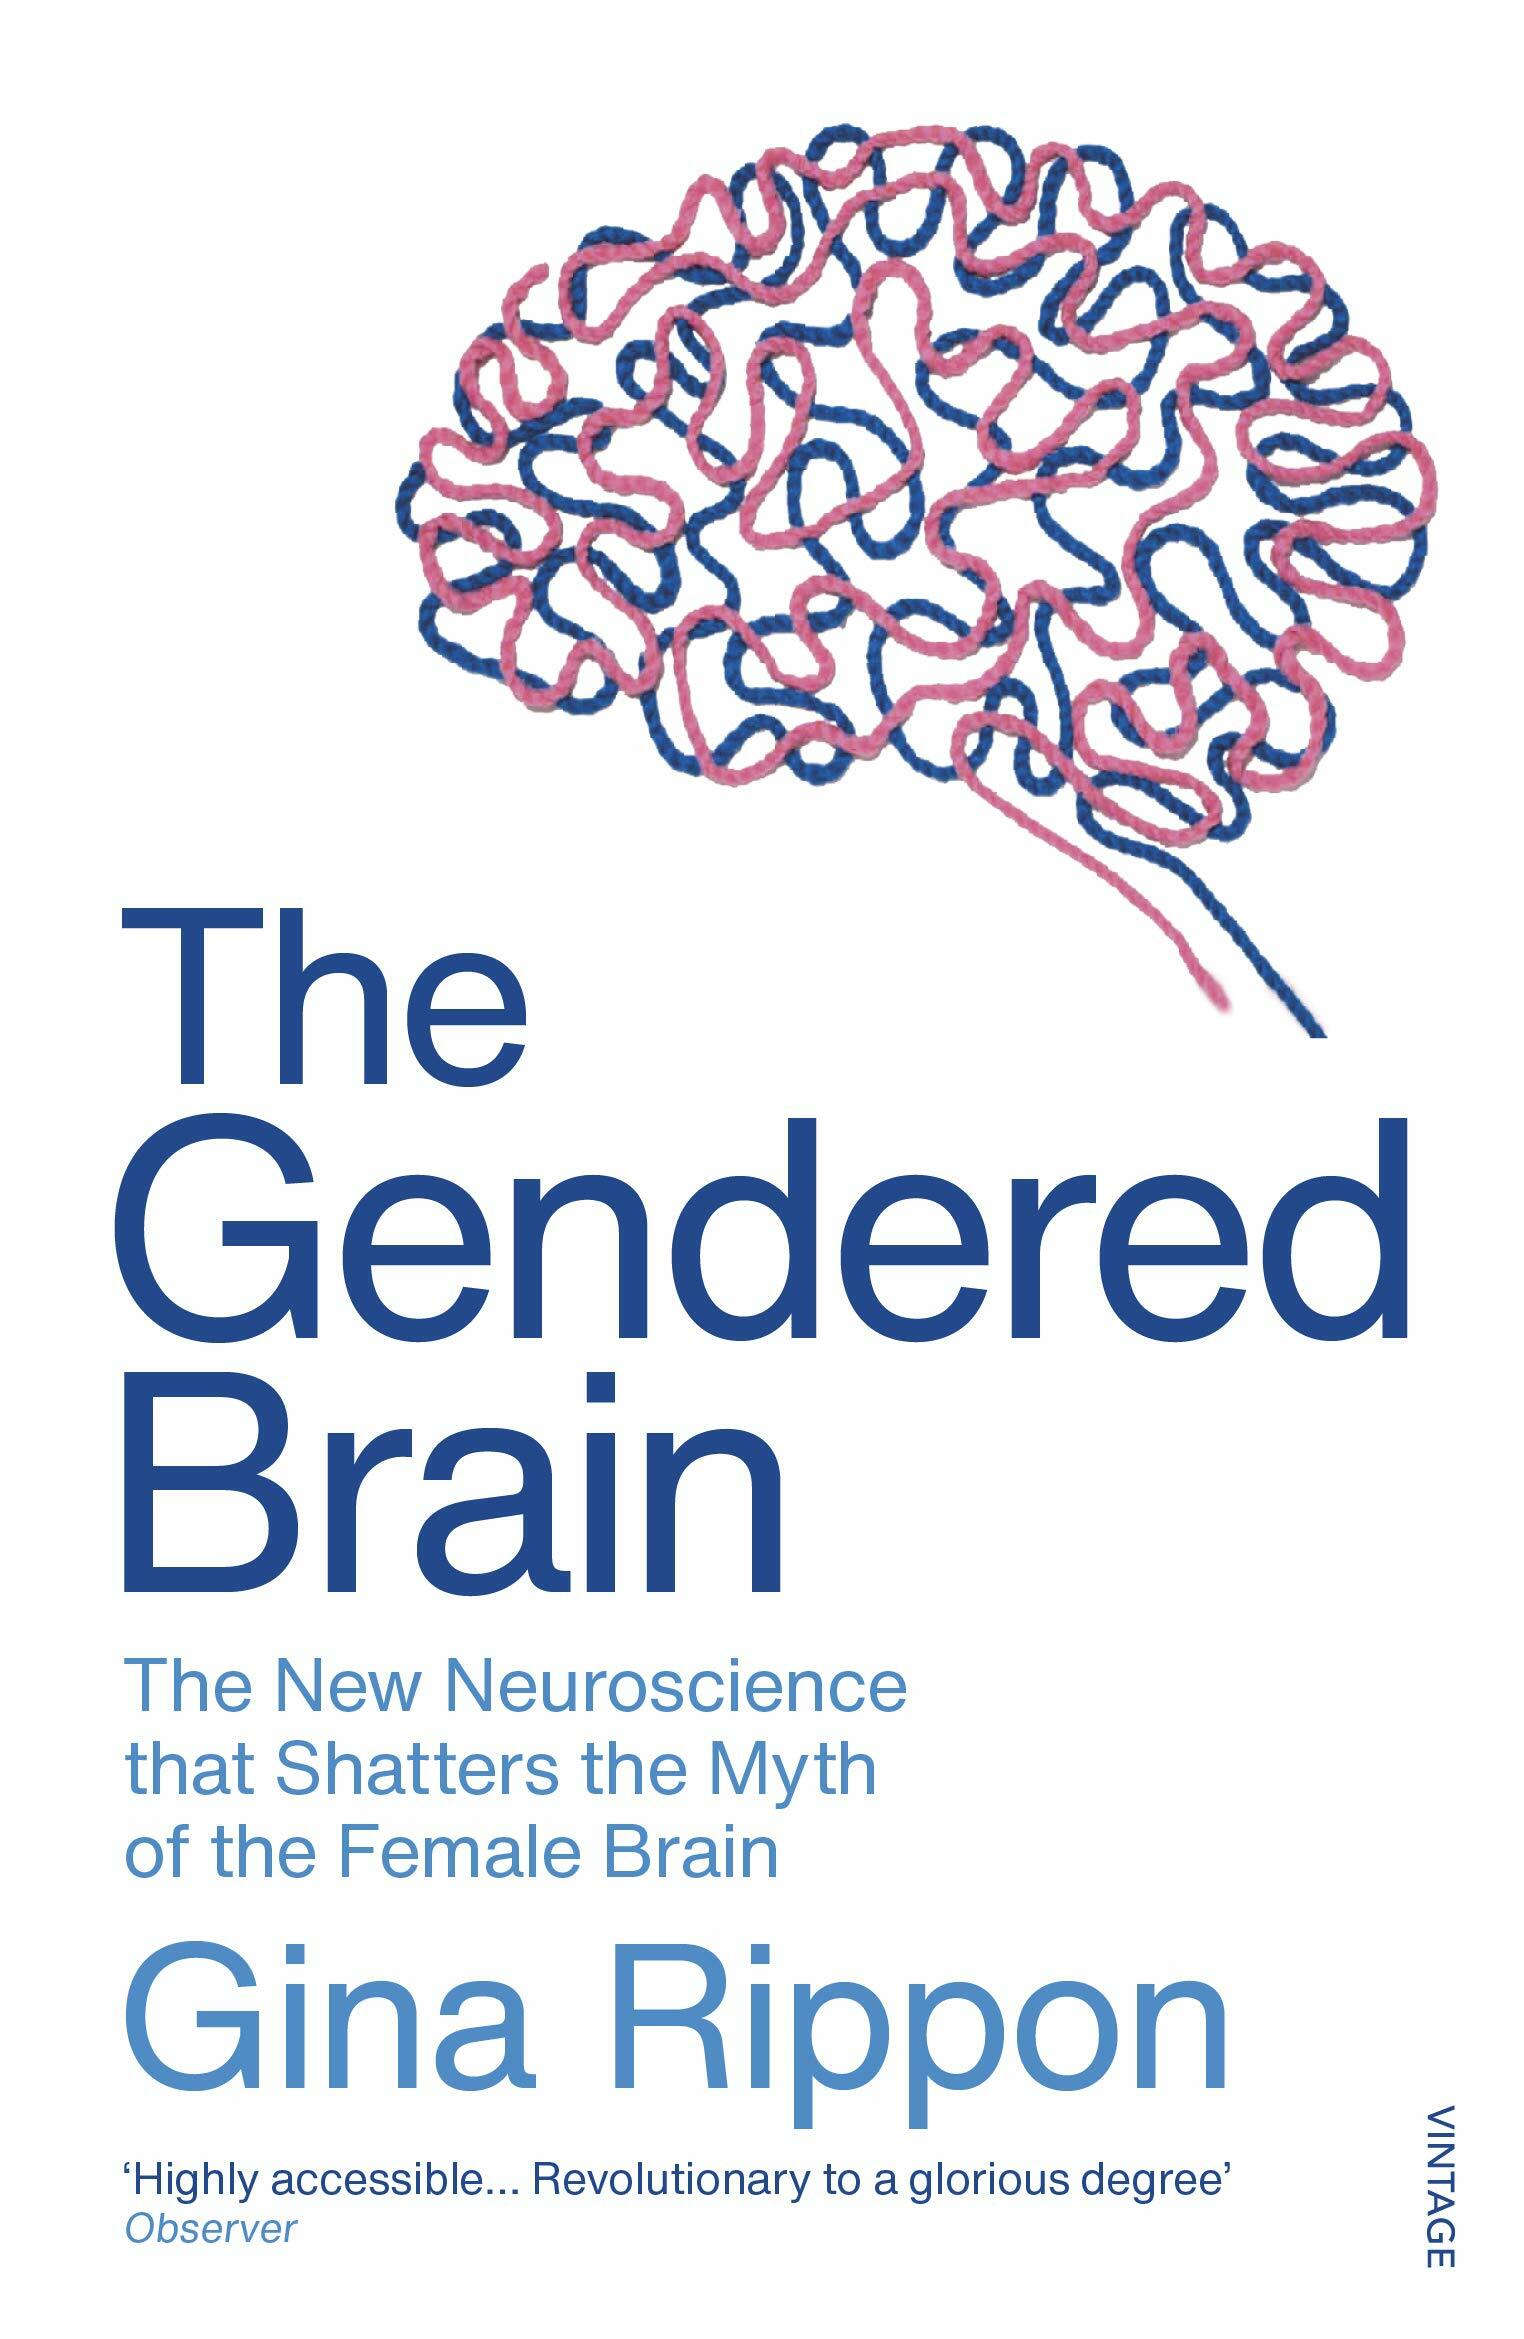 The Gendered Brain : The new neuroscience that shatters the myth of the female brain (Paperback)